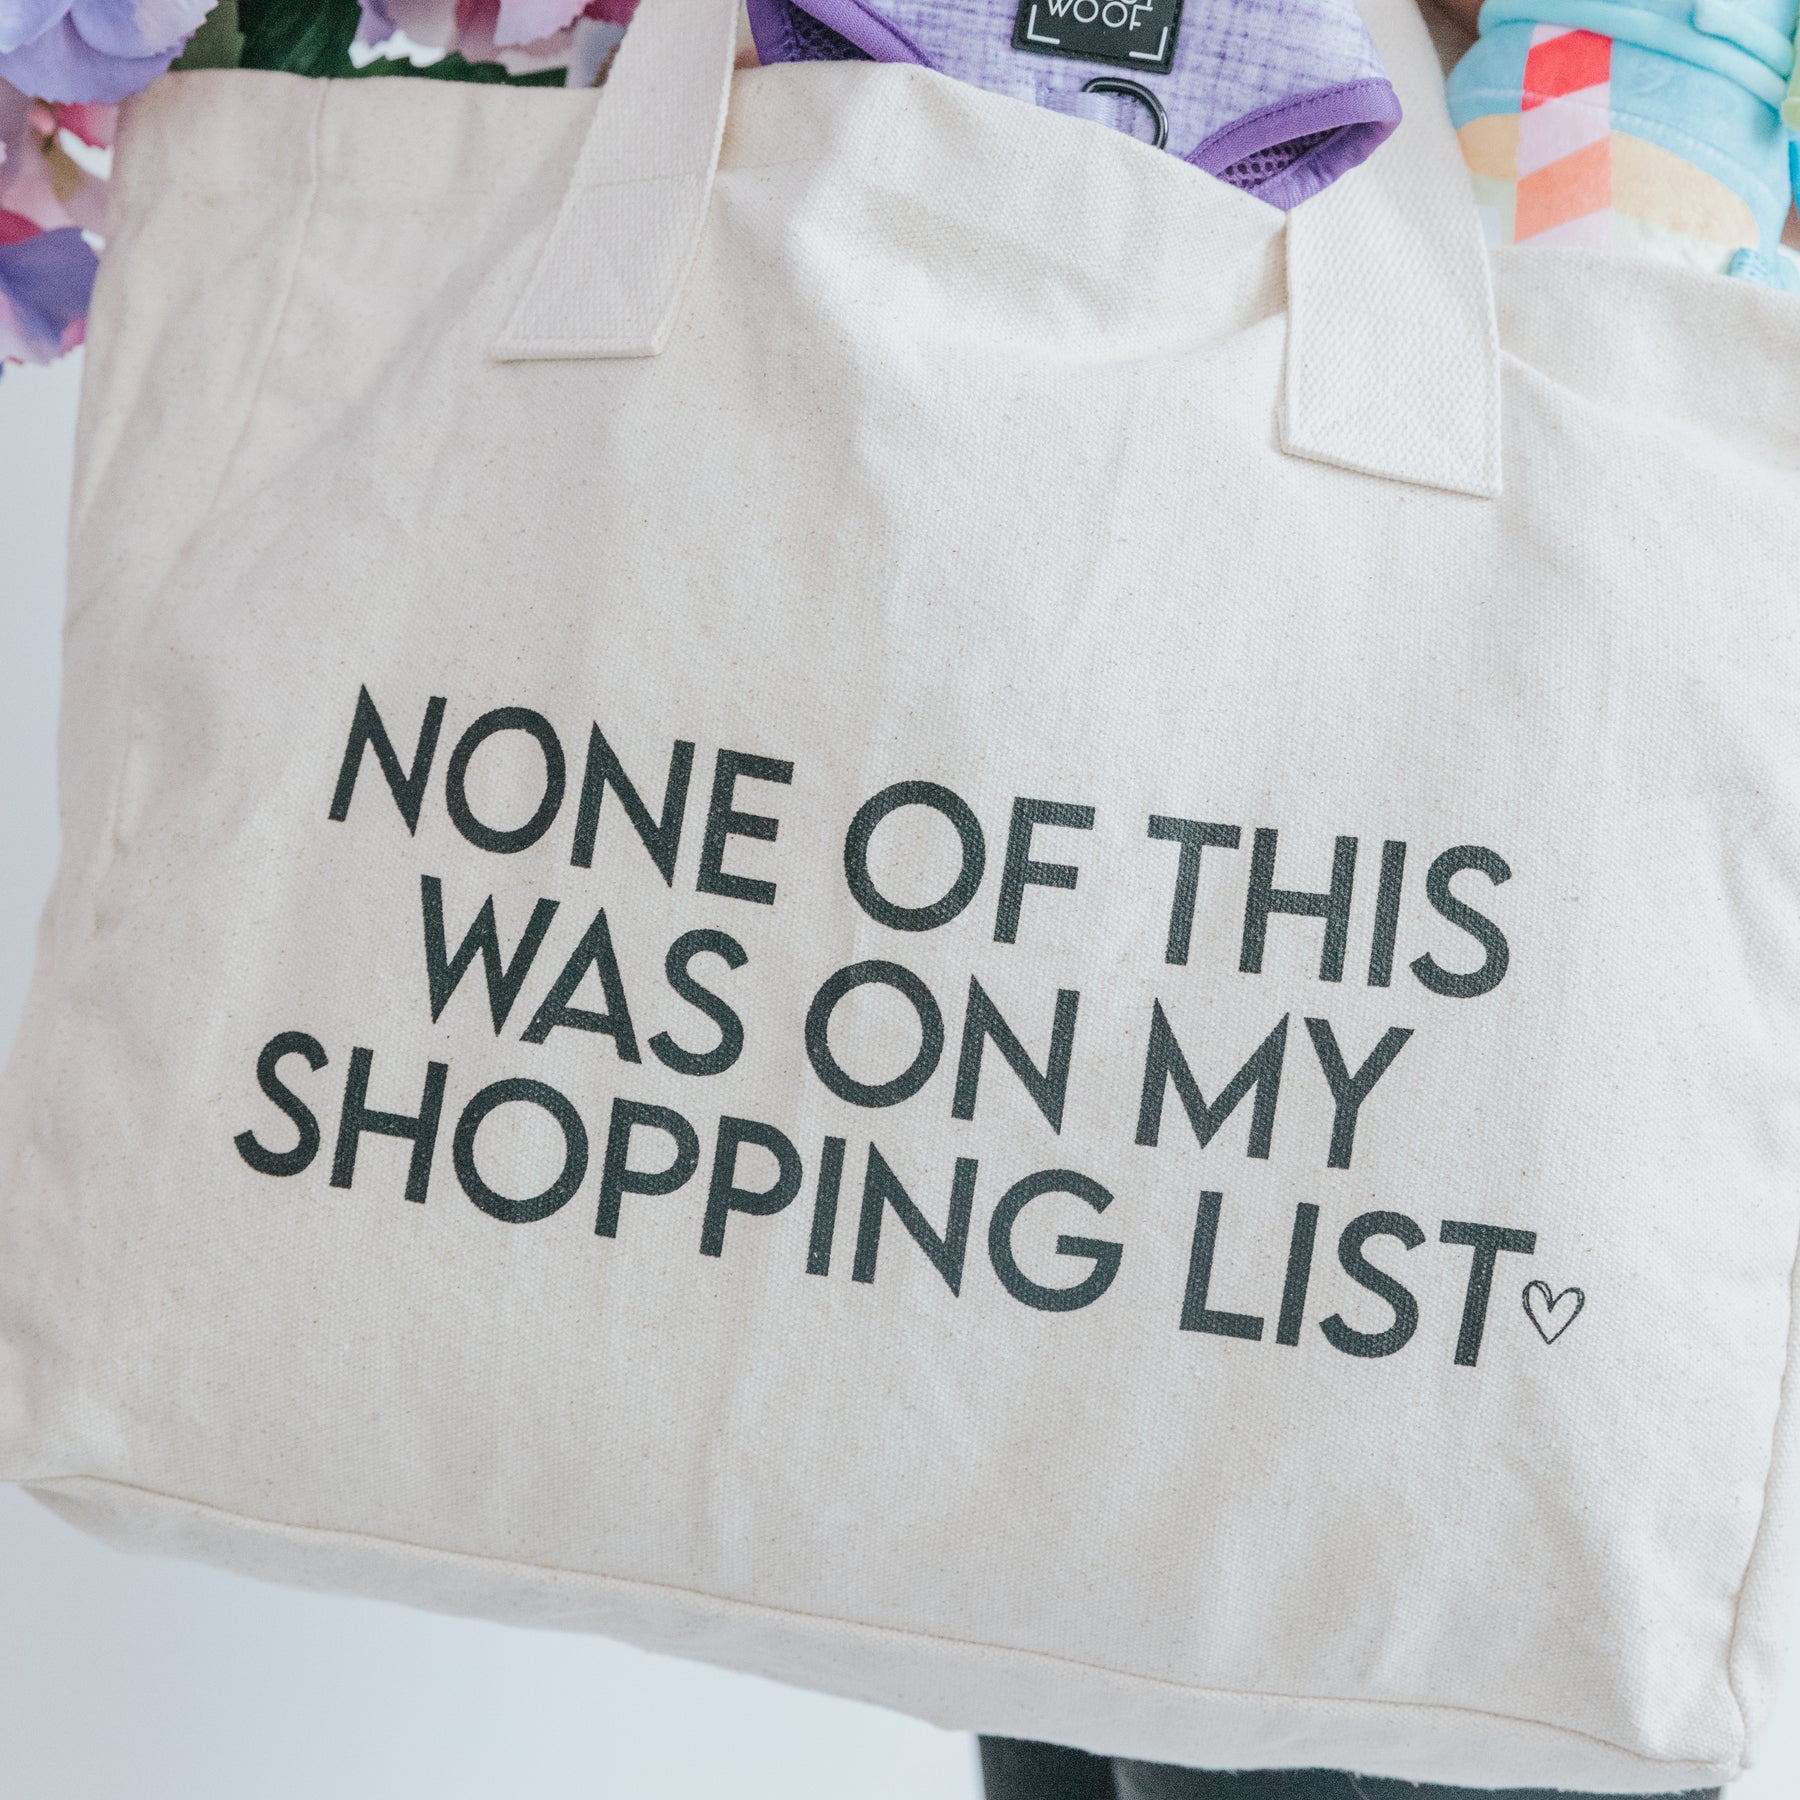 'None of This Was on My Shopping List' Tote Bag